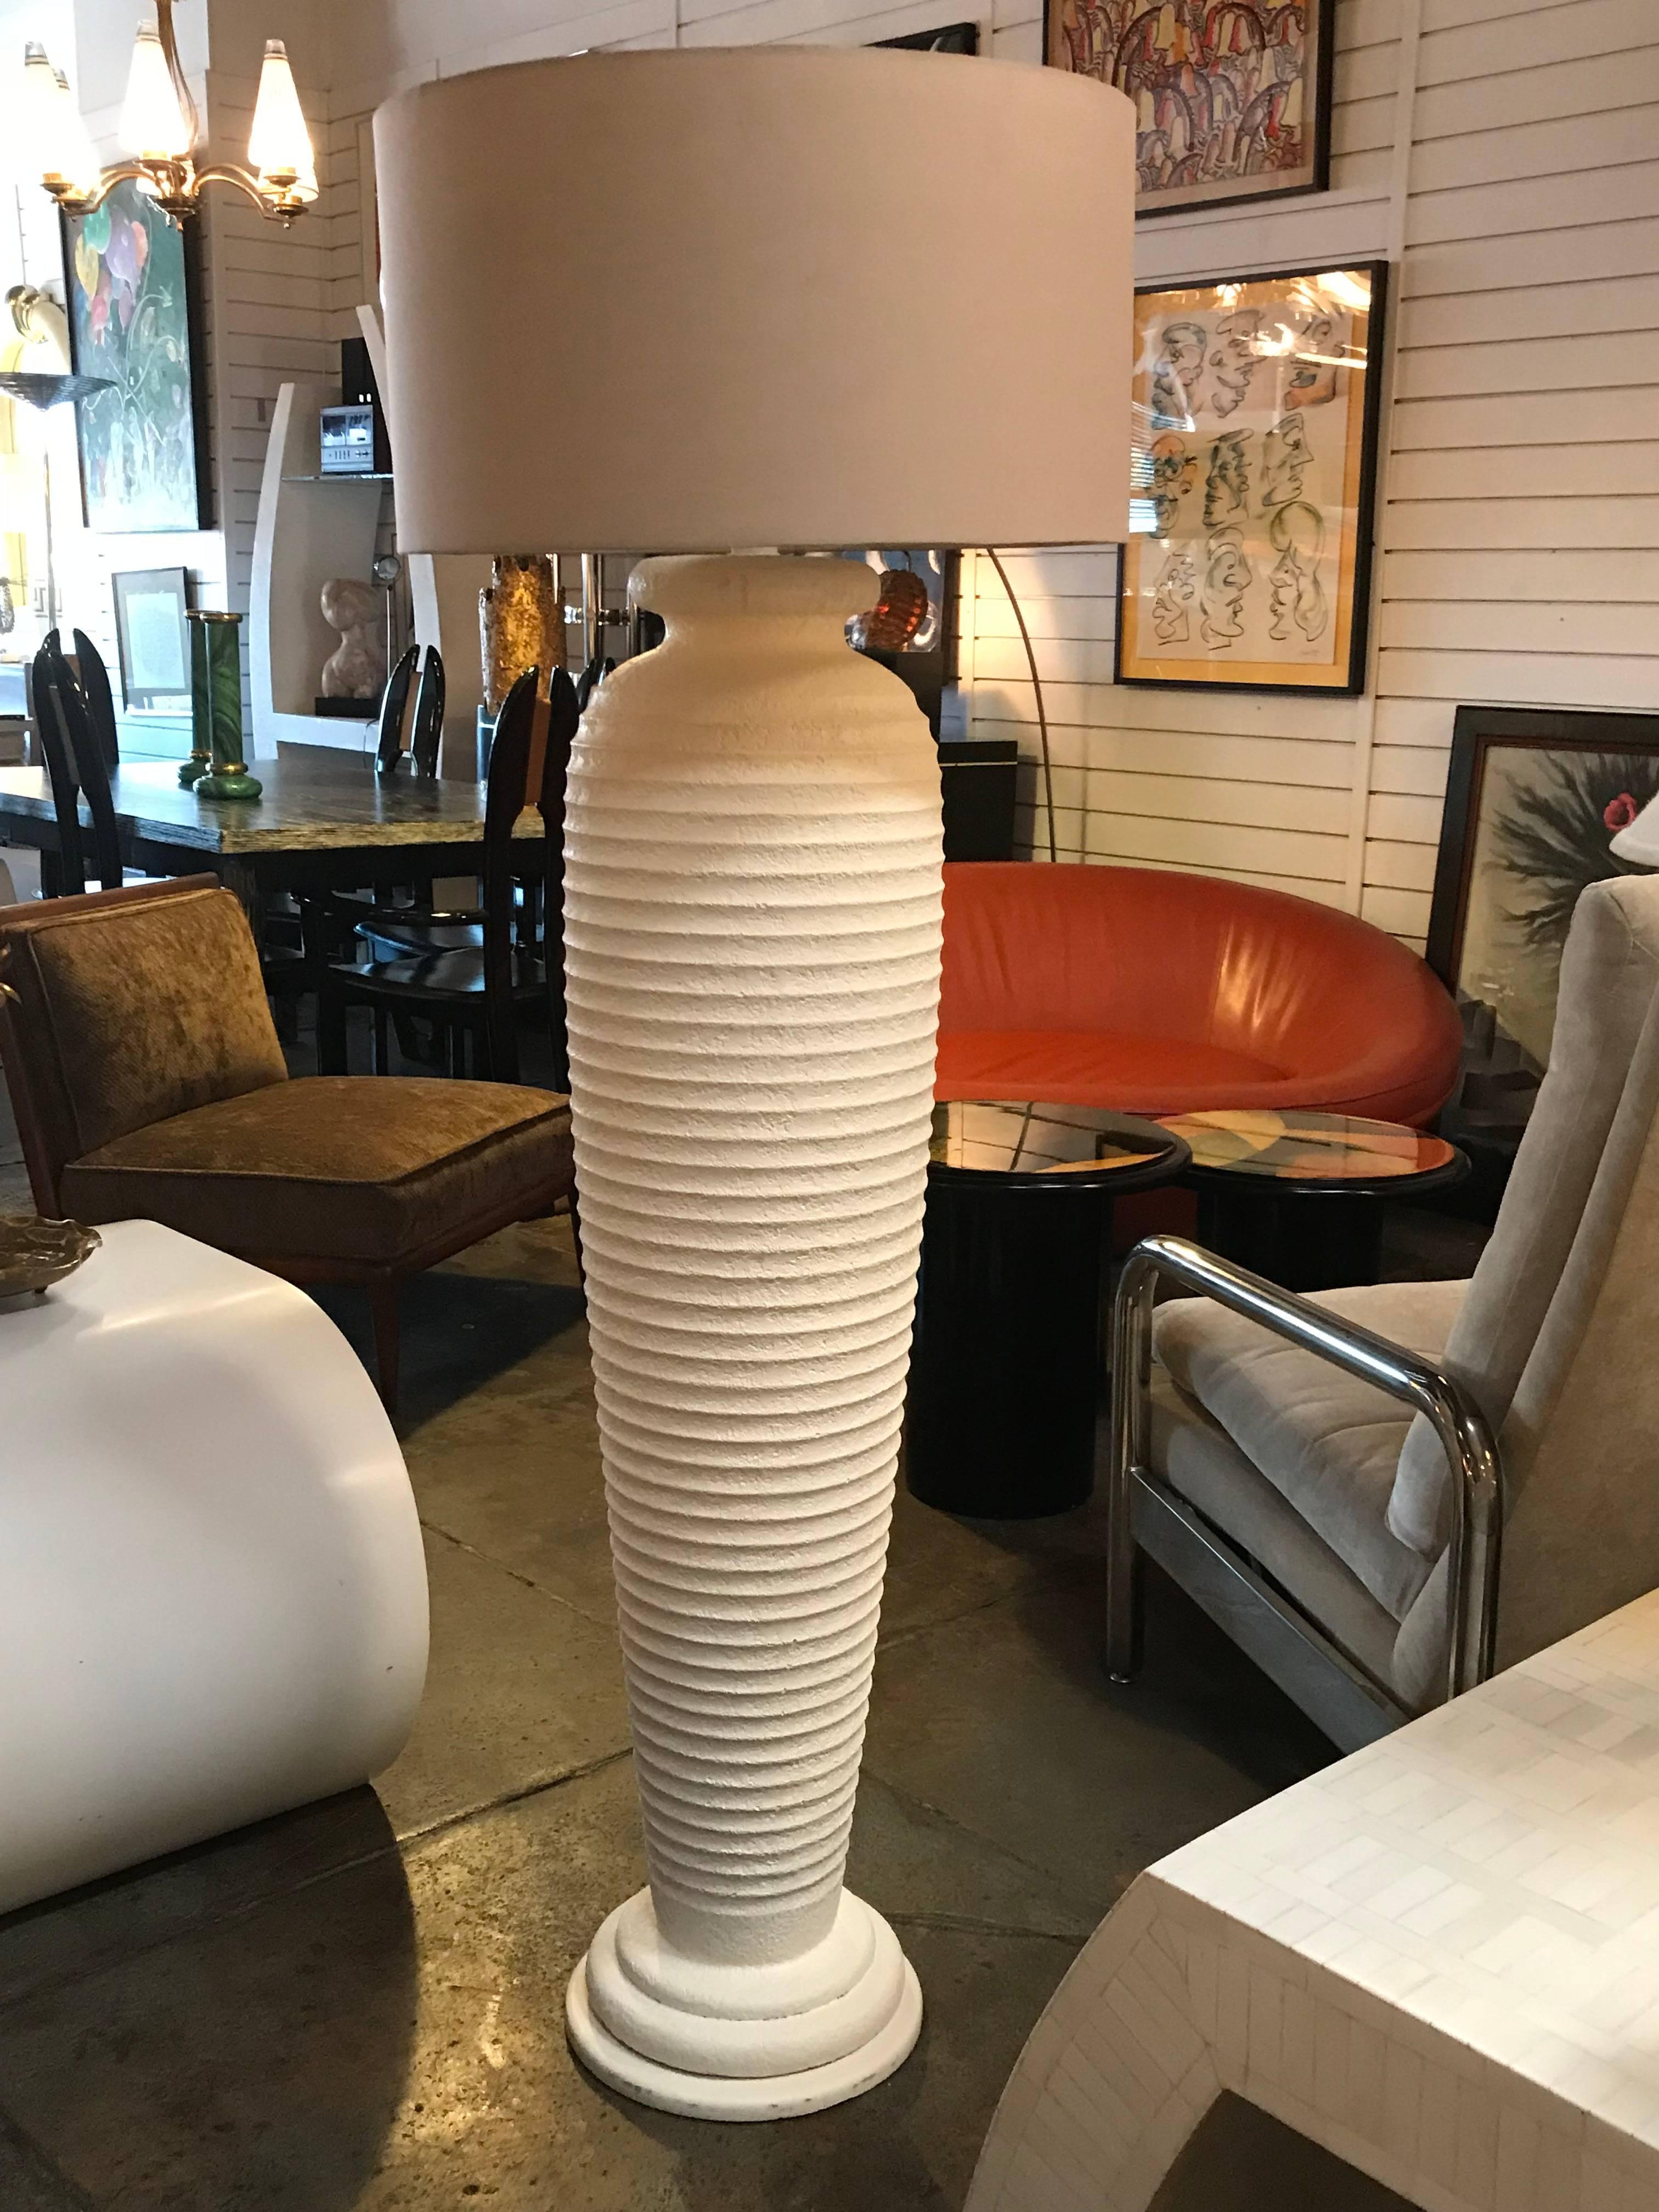 Cream textured plaster 1980s floor lamp

Measures: 63.0" to top of finial or 51.0" to bottom of harp.
Fabric shade is 22.0" in diameter.